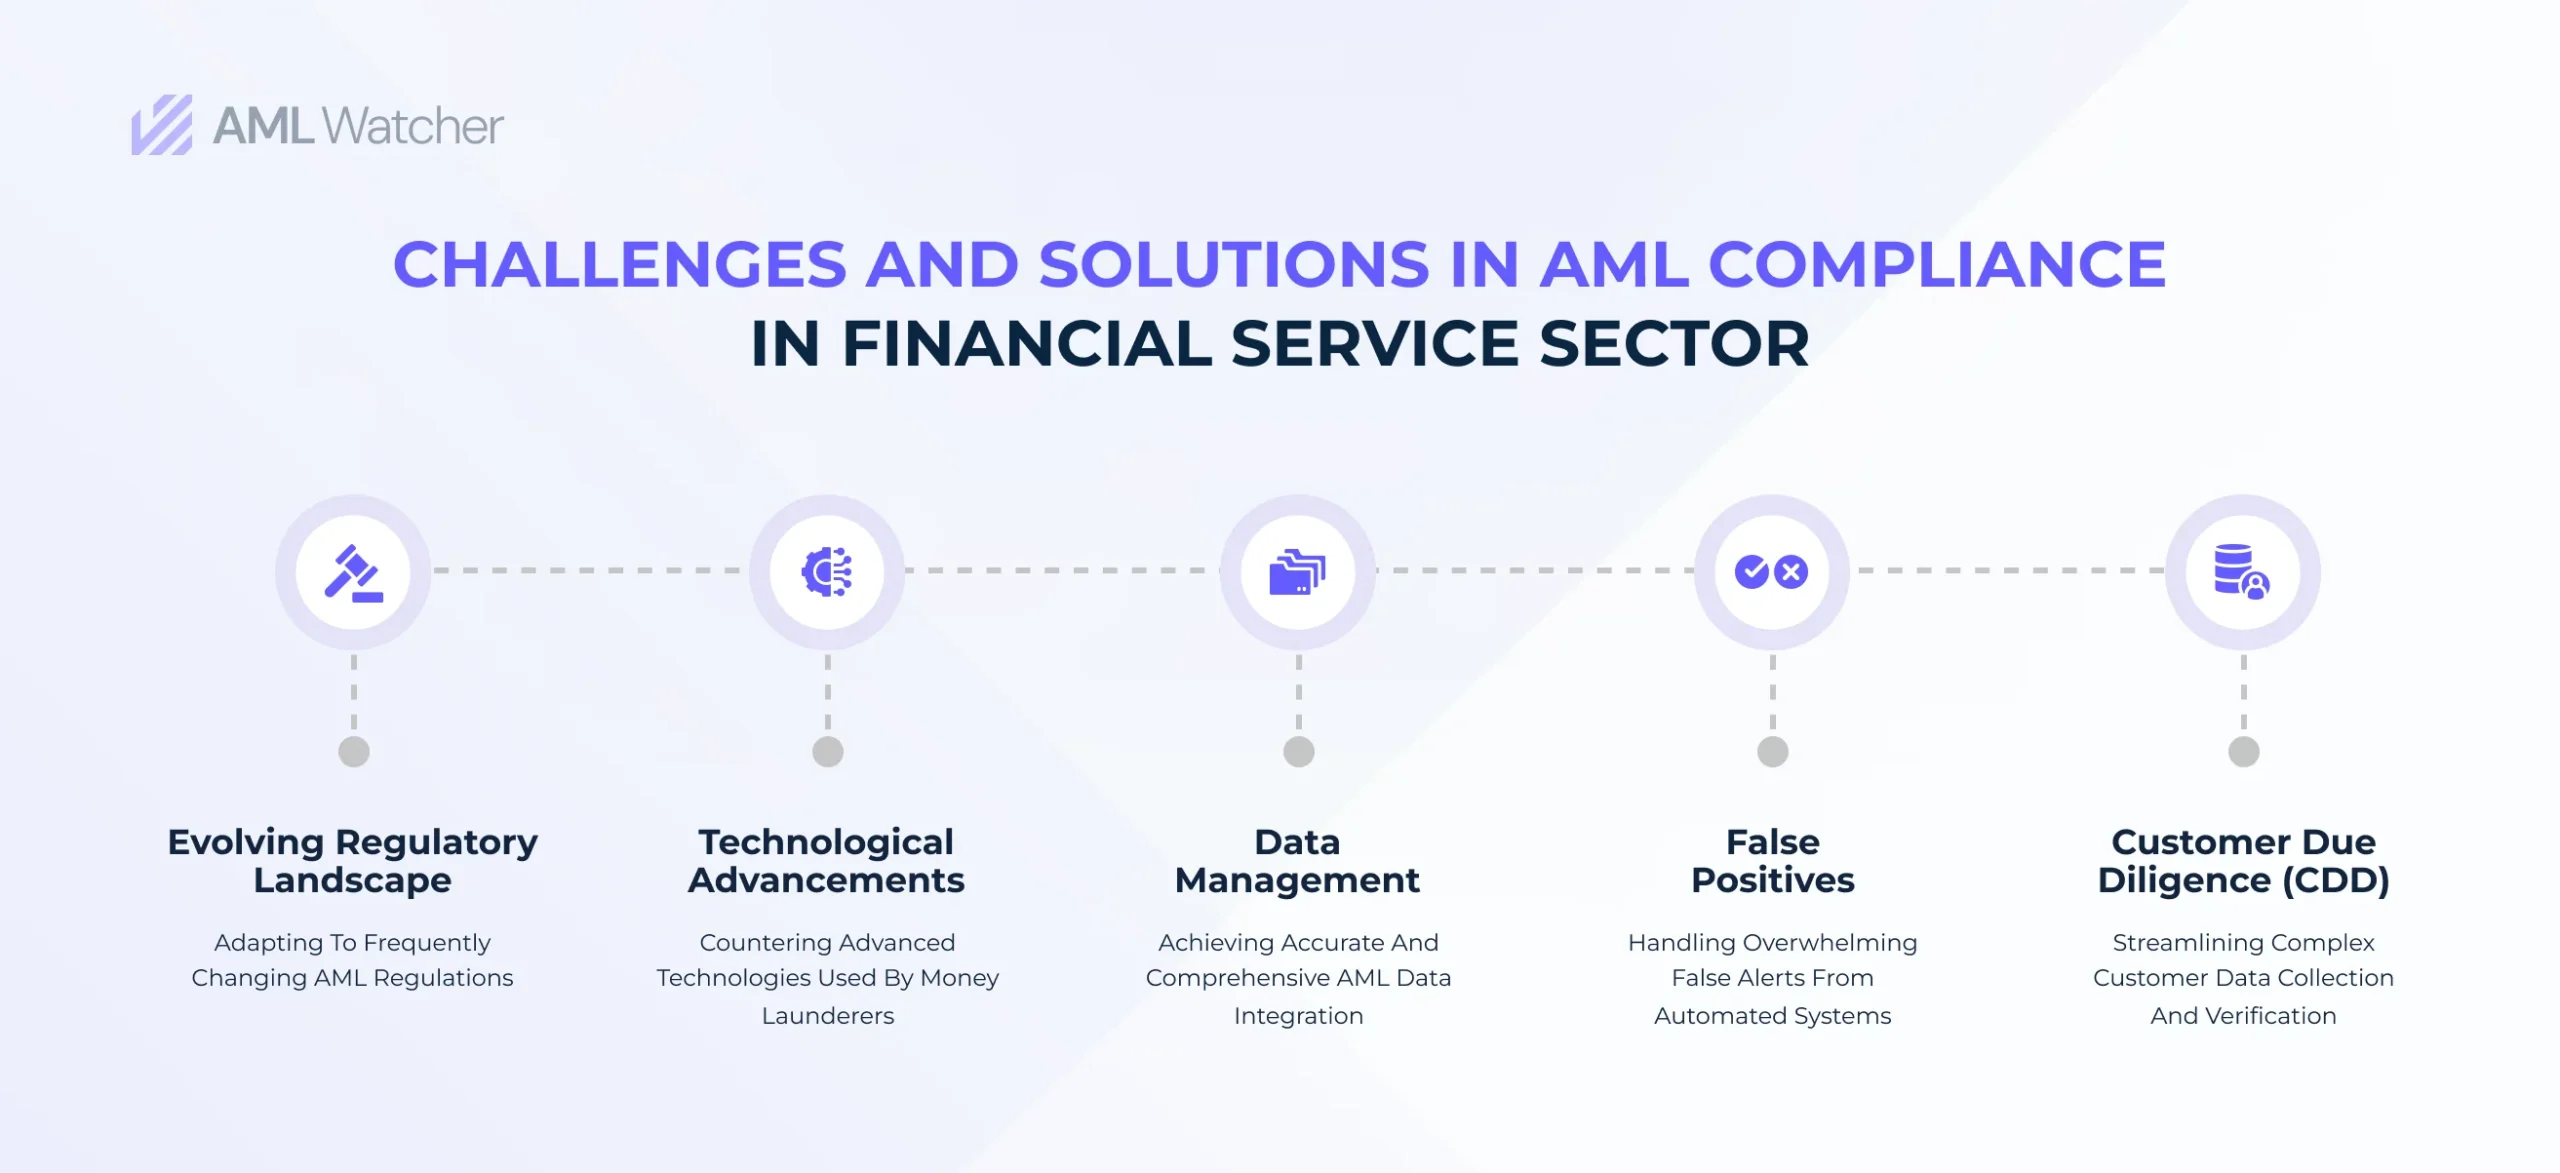 AML challenges: Adapting to changing regulations, managing data, addressing false alerts, & refining CDD processes.